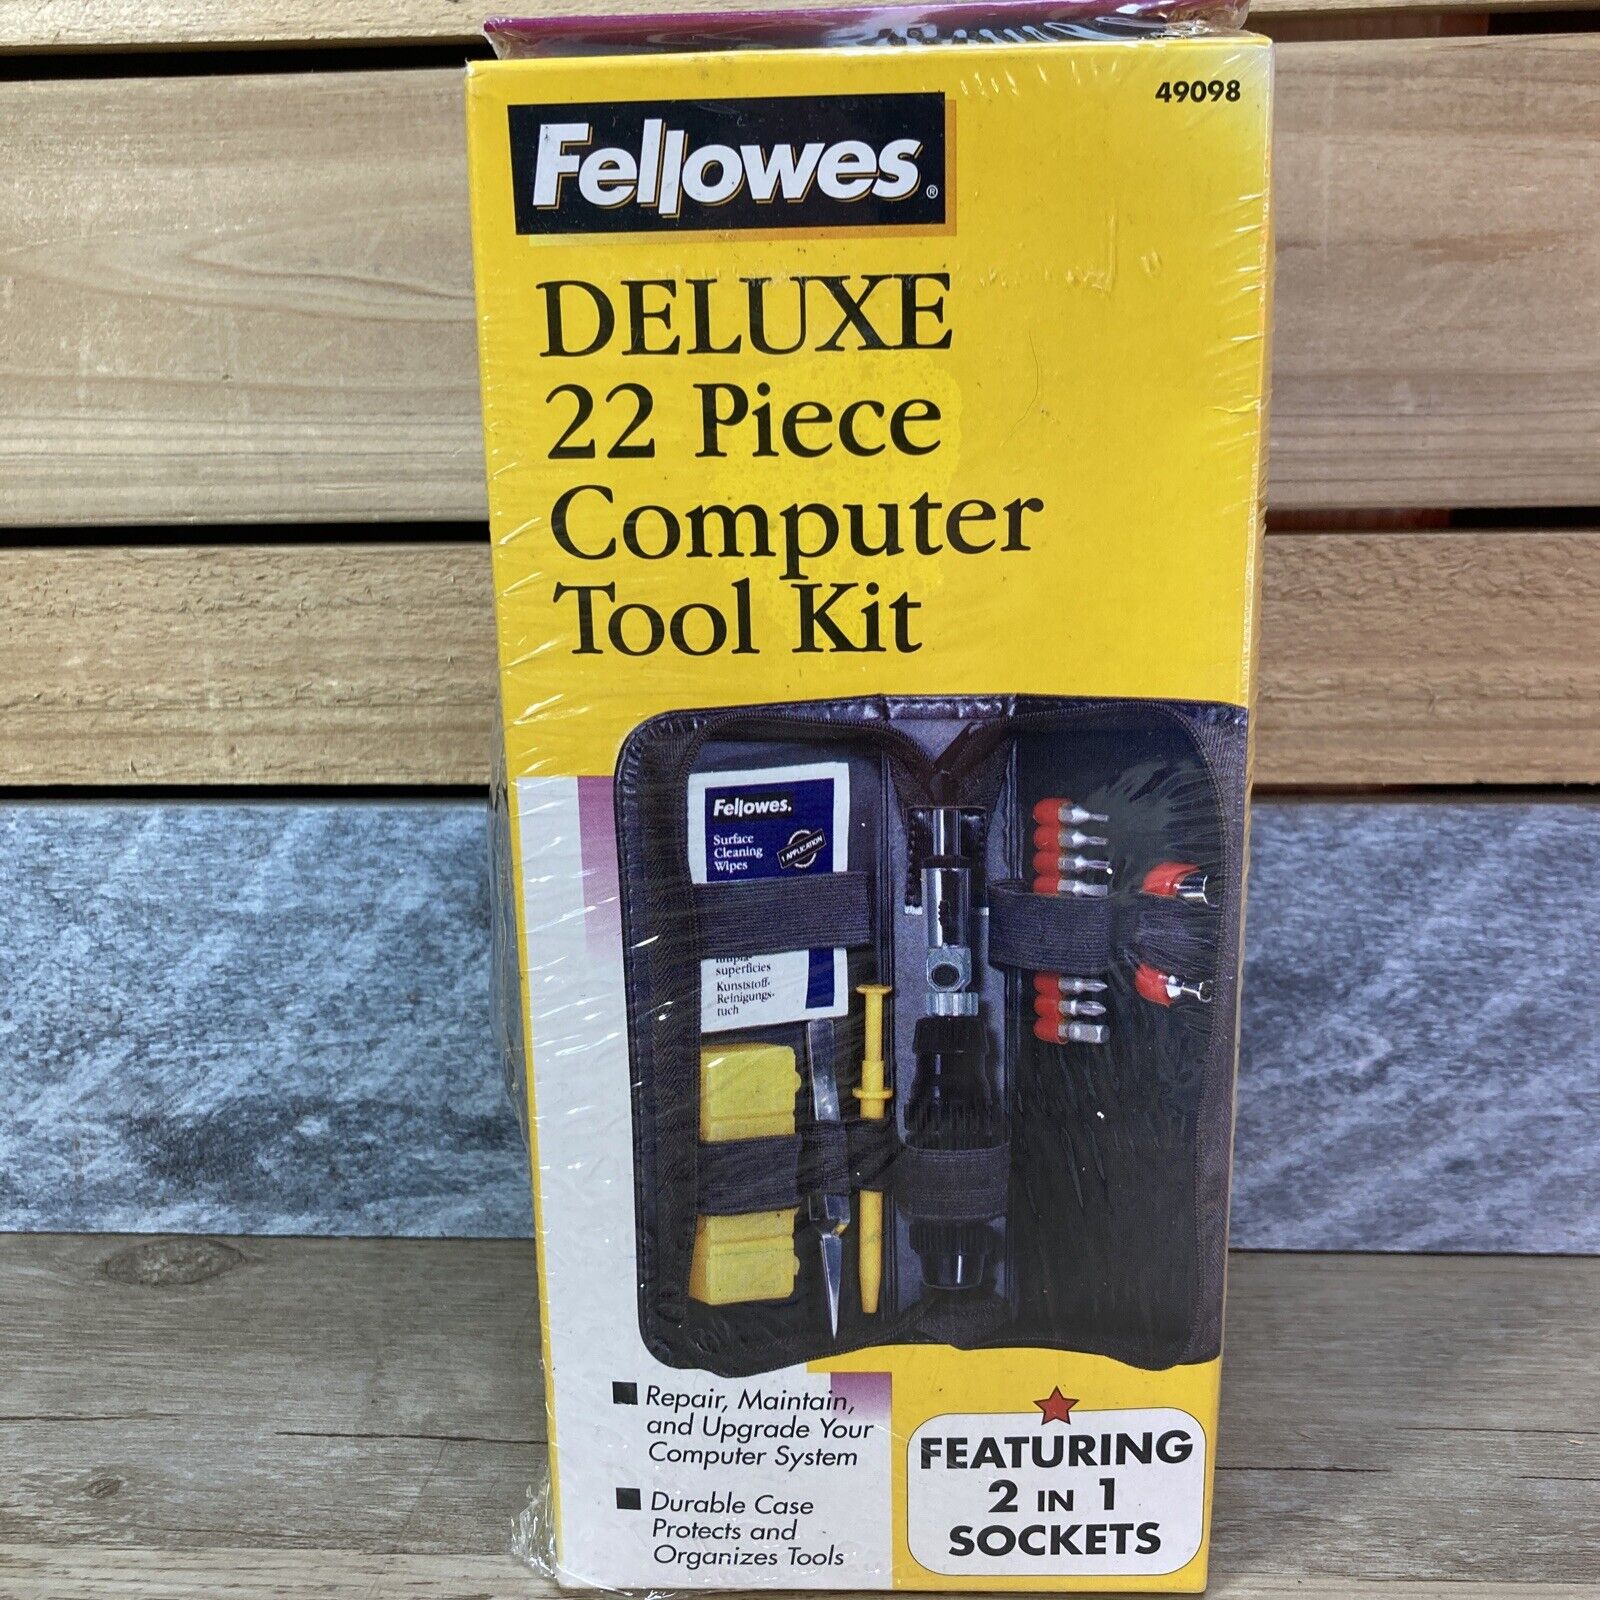 Fellowes Deluxe 22 Piece Computer Tool Kit Black Case  w/ Grounding Wrist Strap